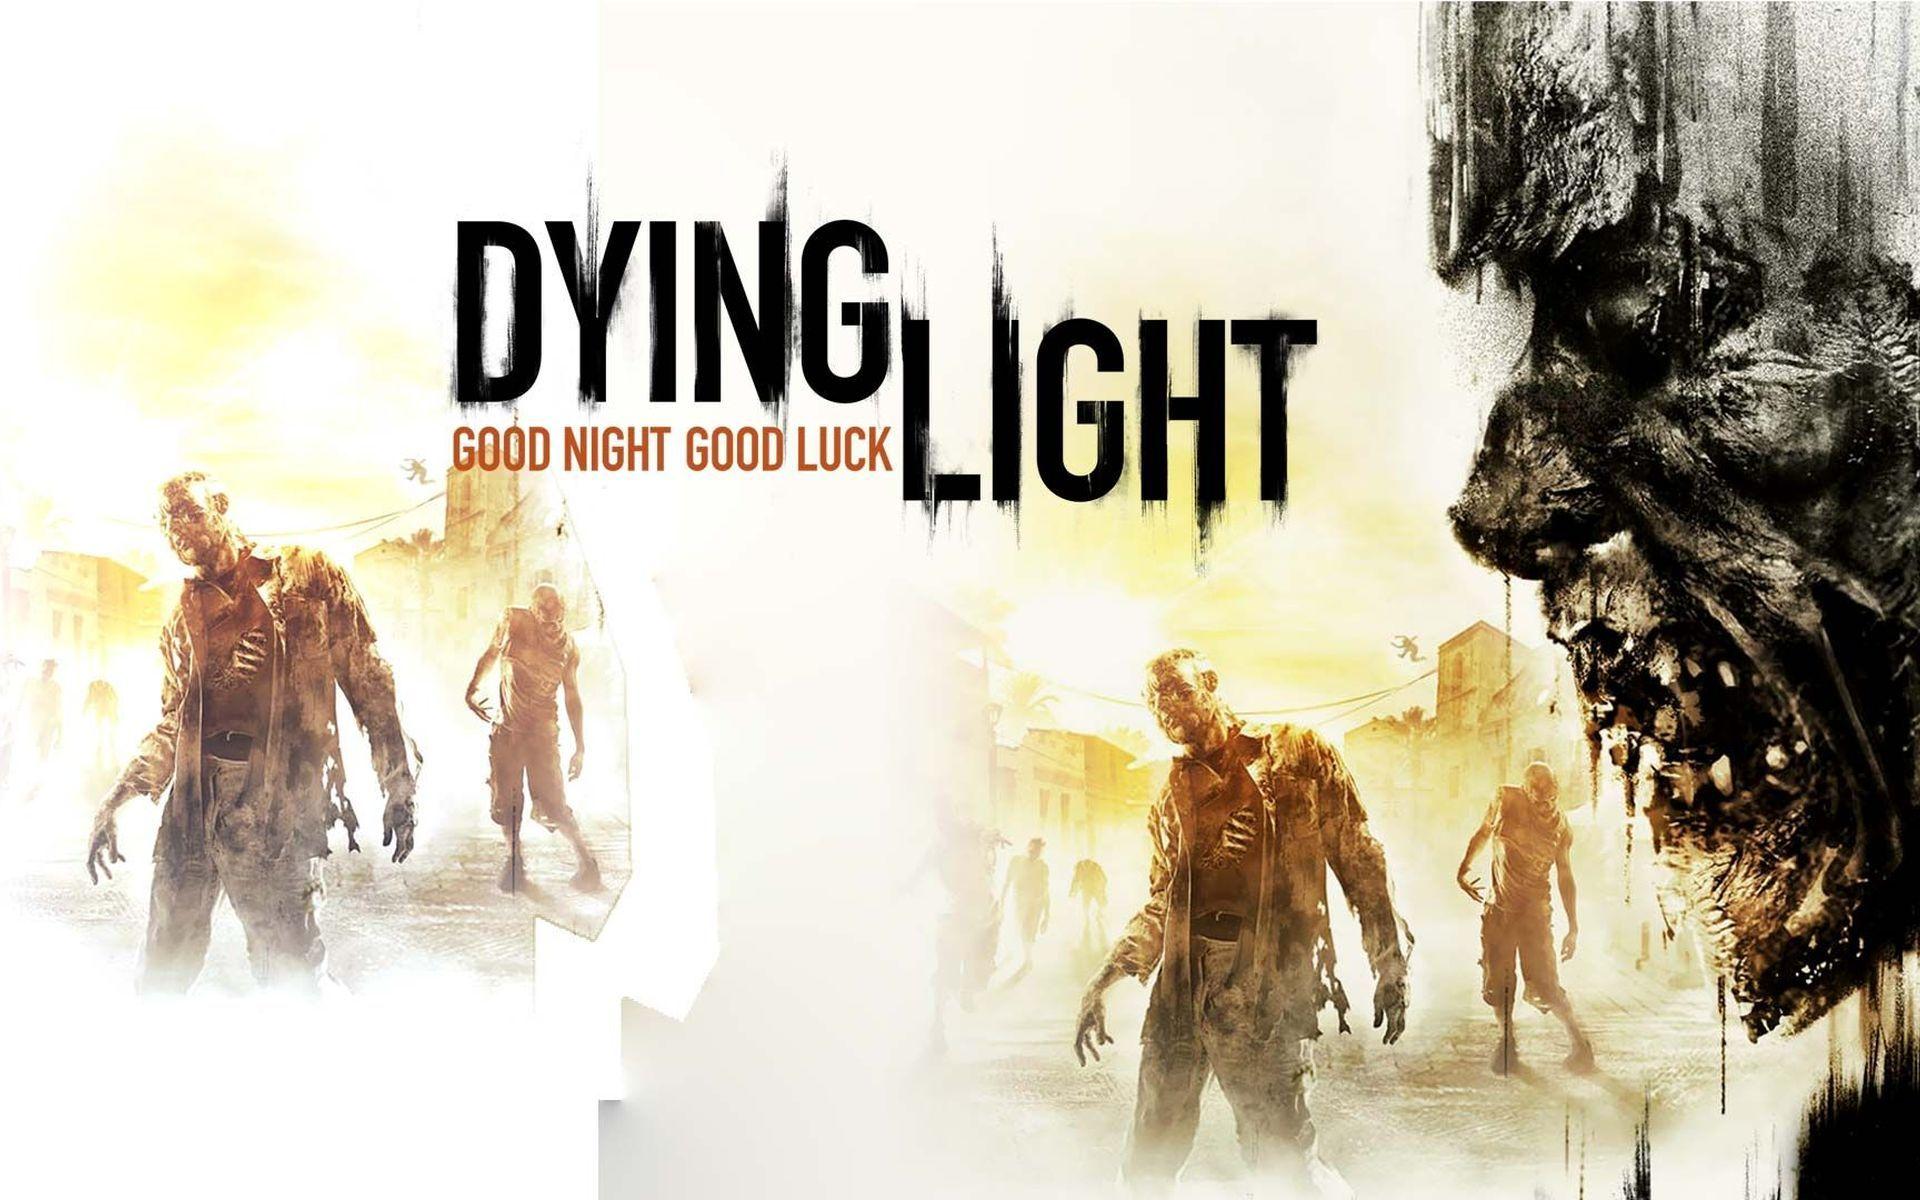 Dying Light Wallpaper and Desktop Background Free Download